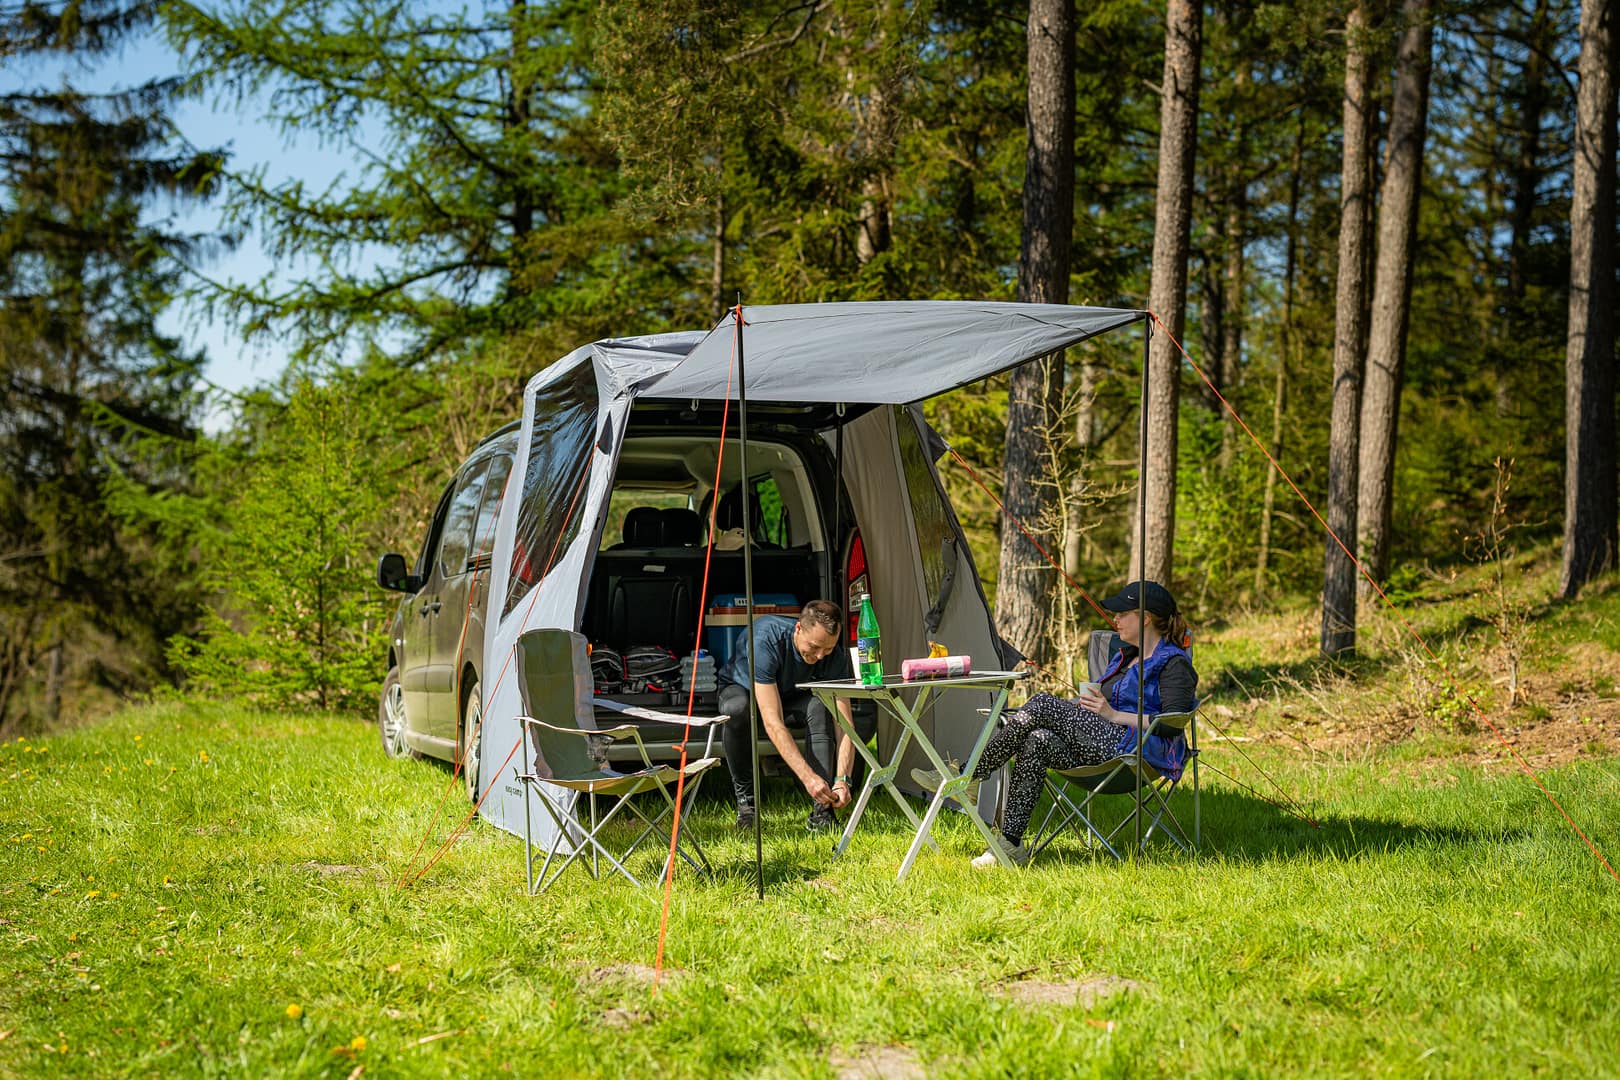 New Easy Camp Awning Extends Vehicle Versatility For Boosting Outdoor Experiences